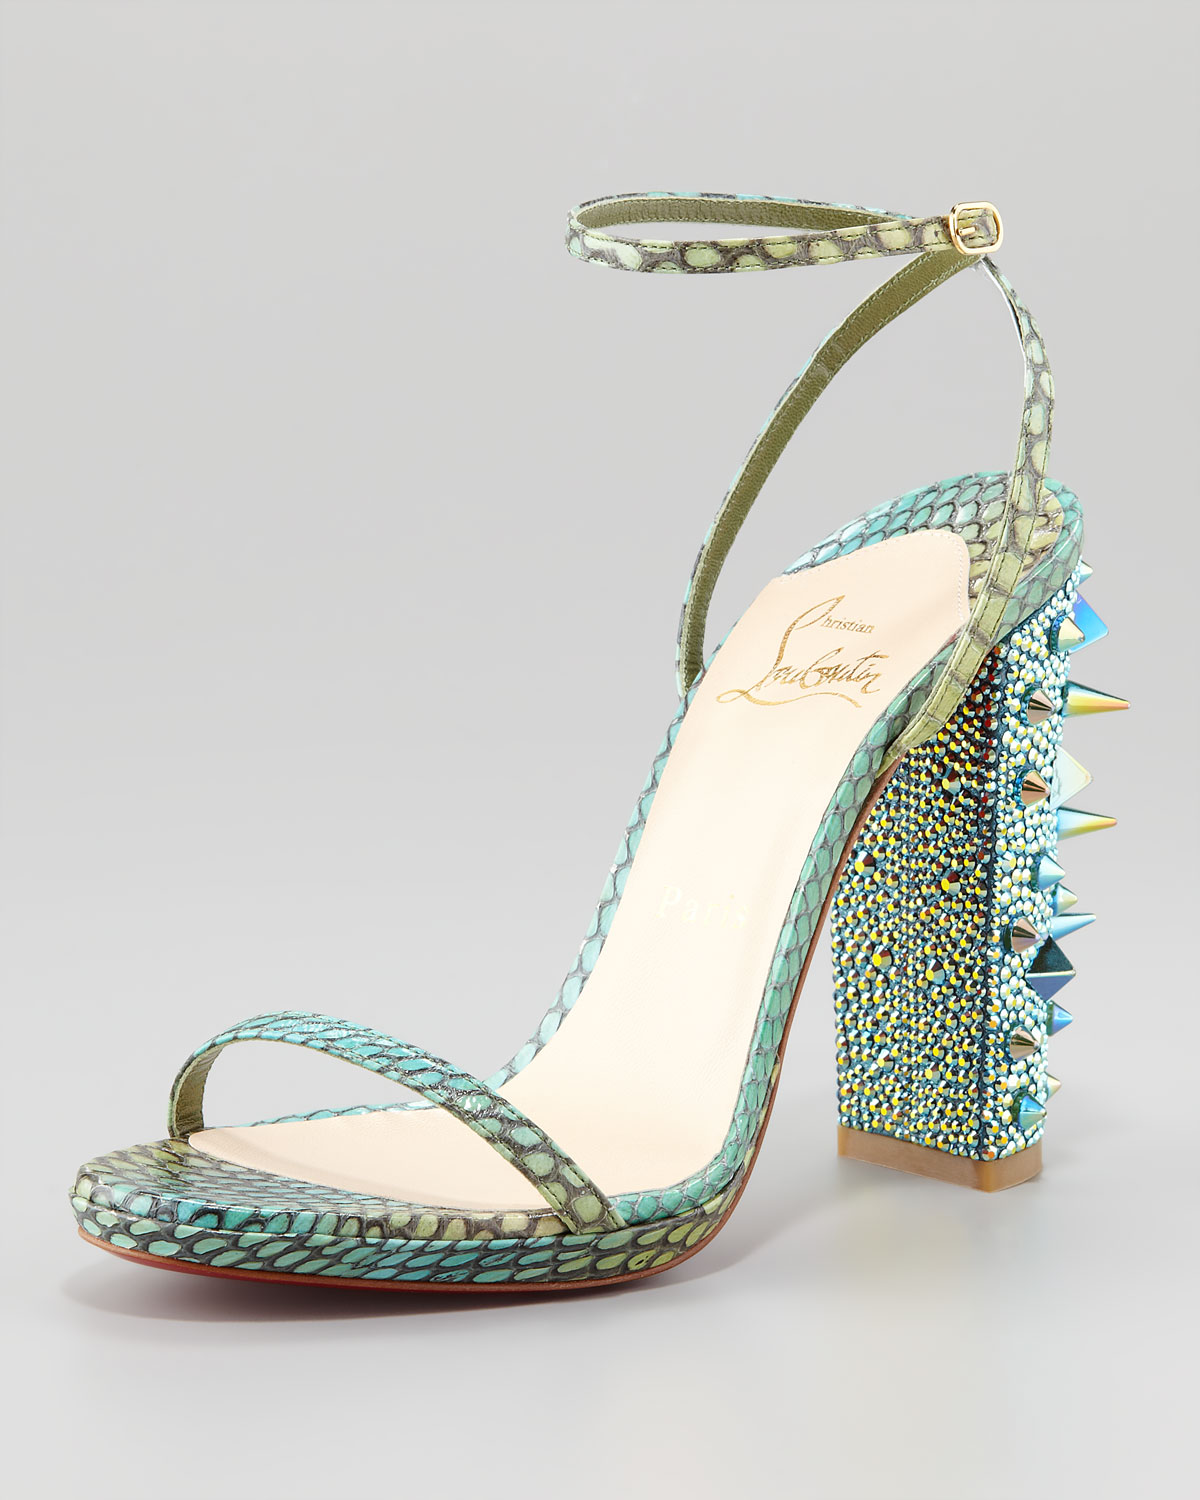 spikes shoes for men - Christian louboutin Au Palace Spikeheel Snakeskin Sandal in Green ...